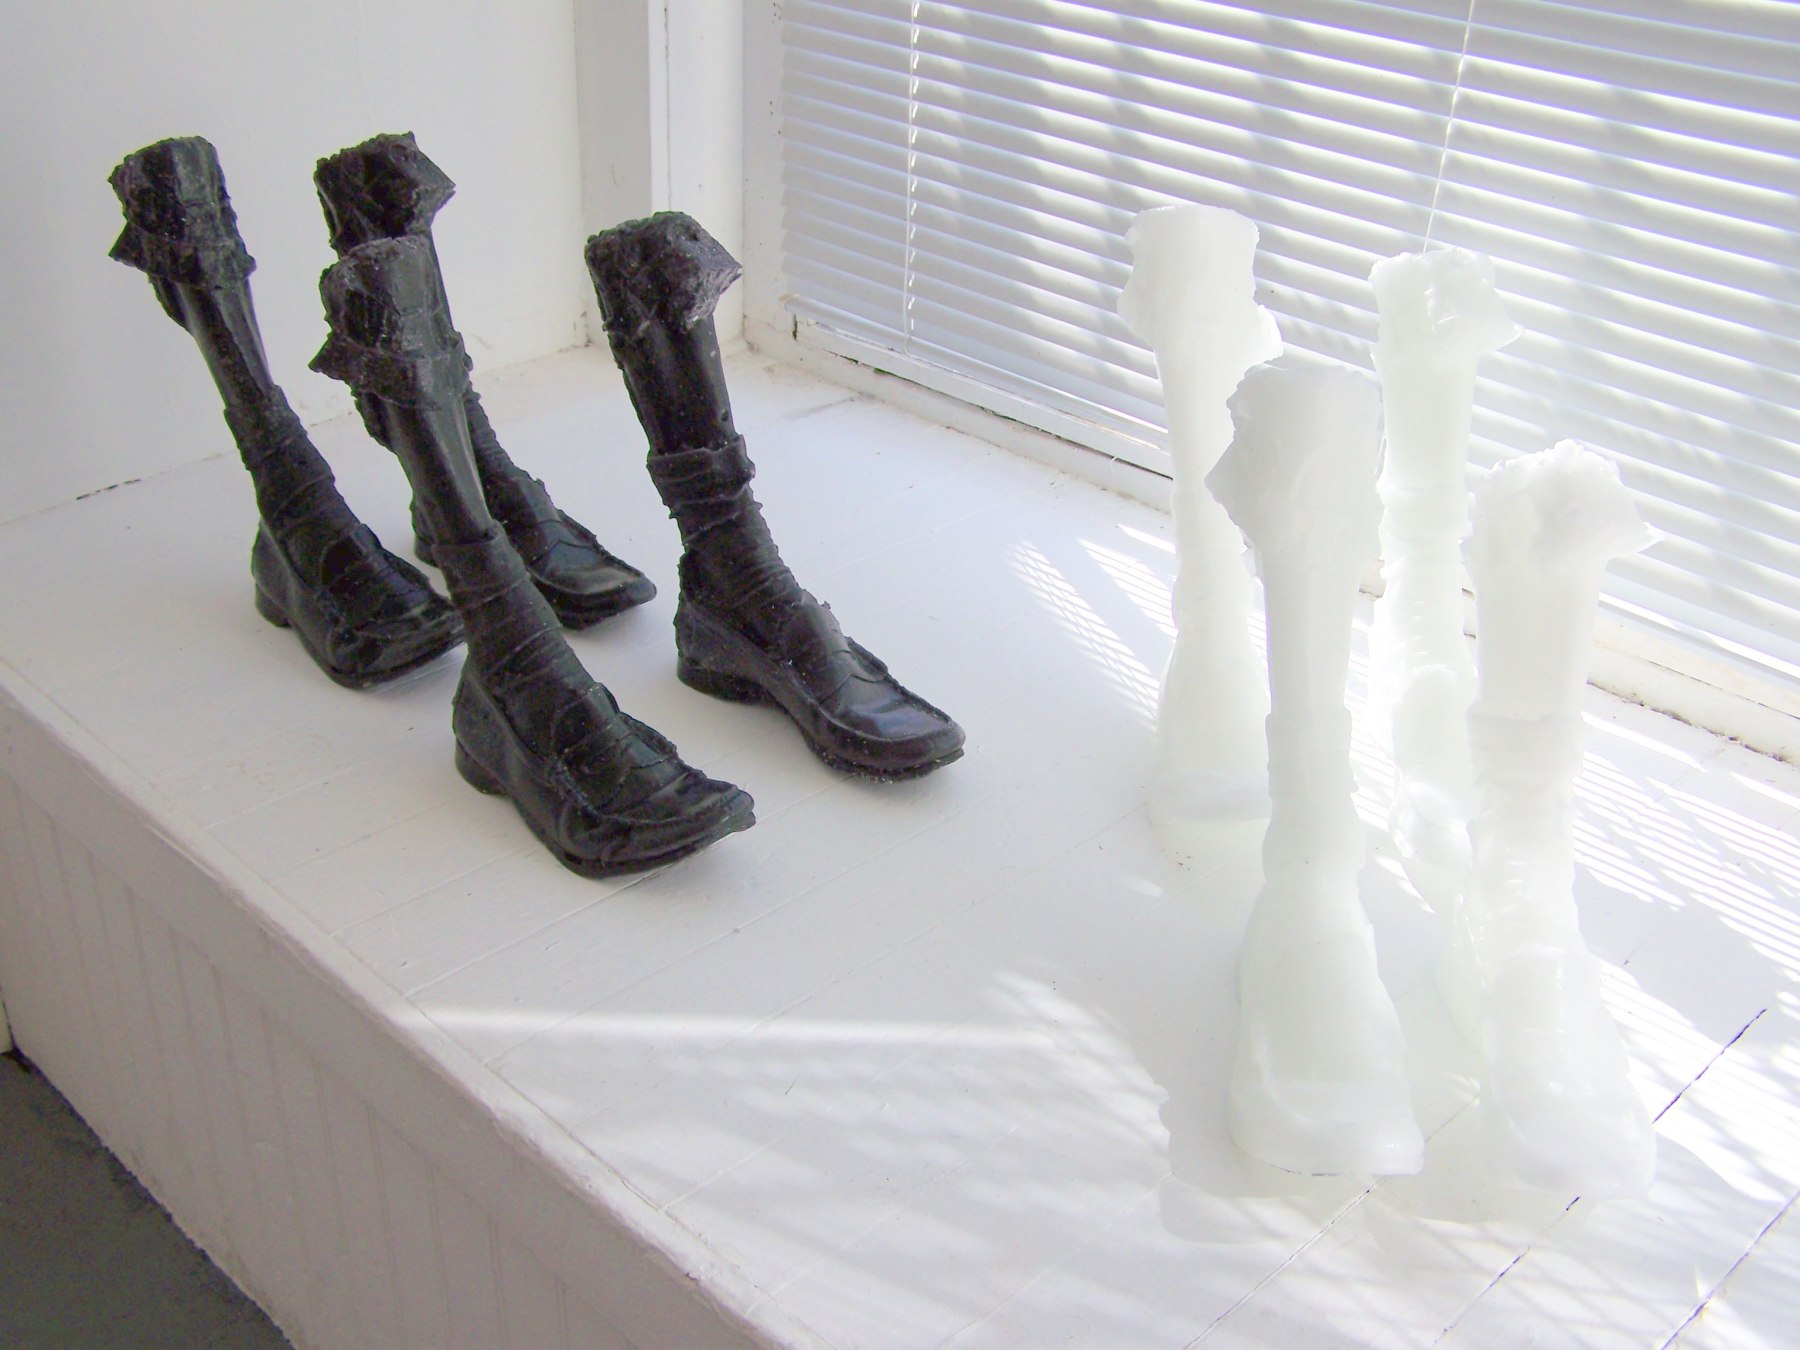 plastic legs displayed by window sill